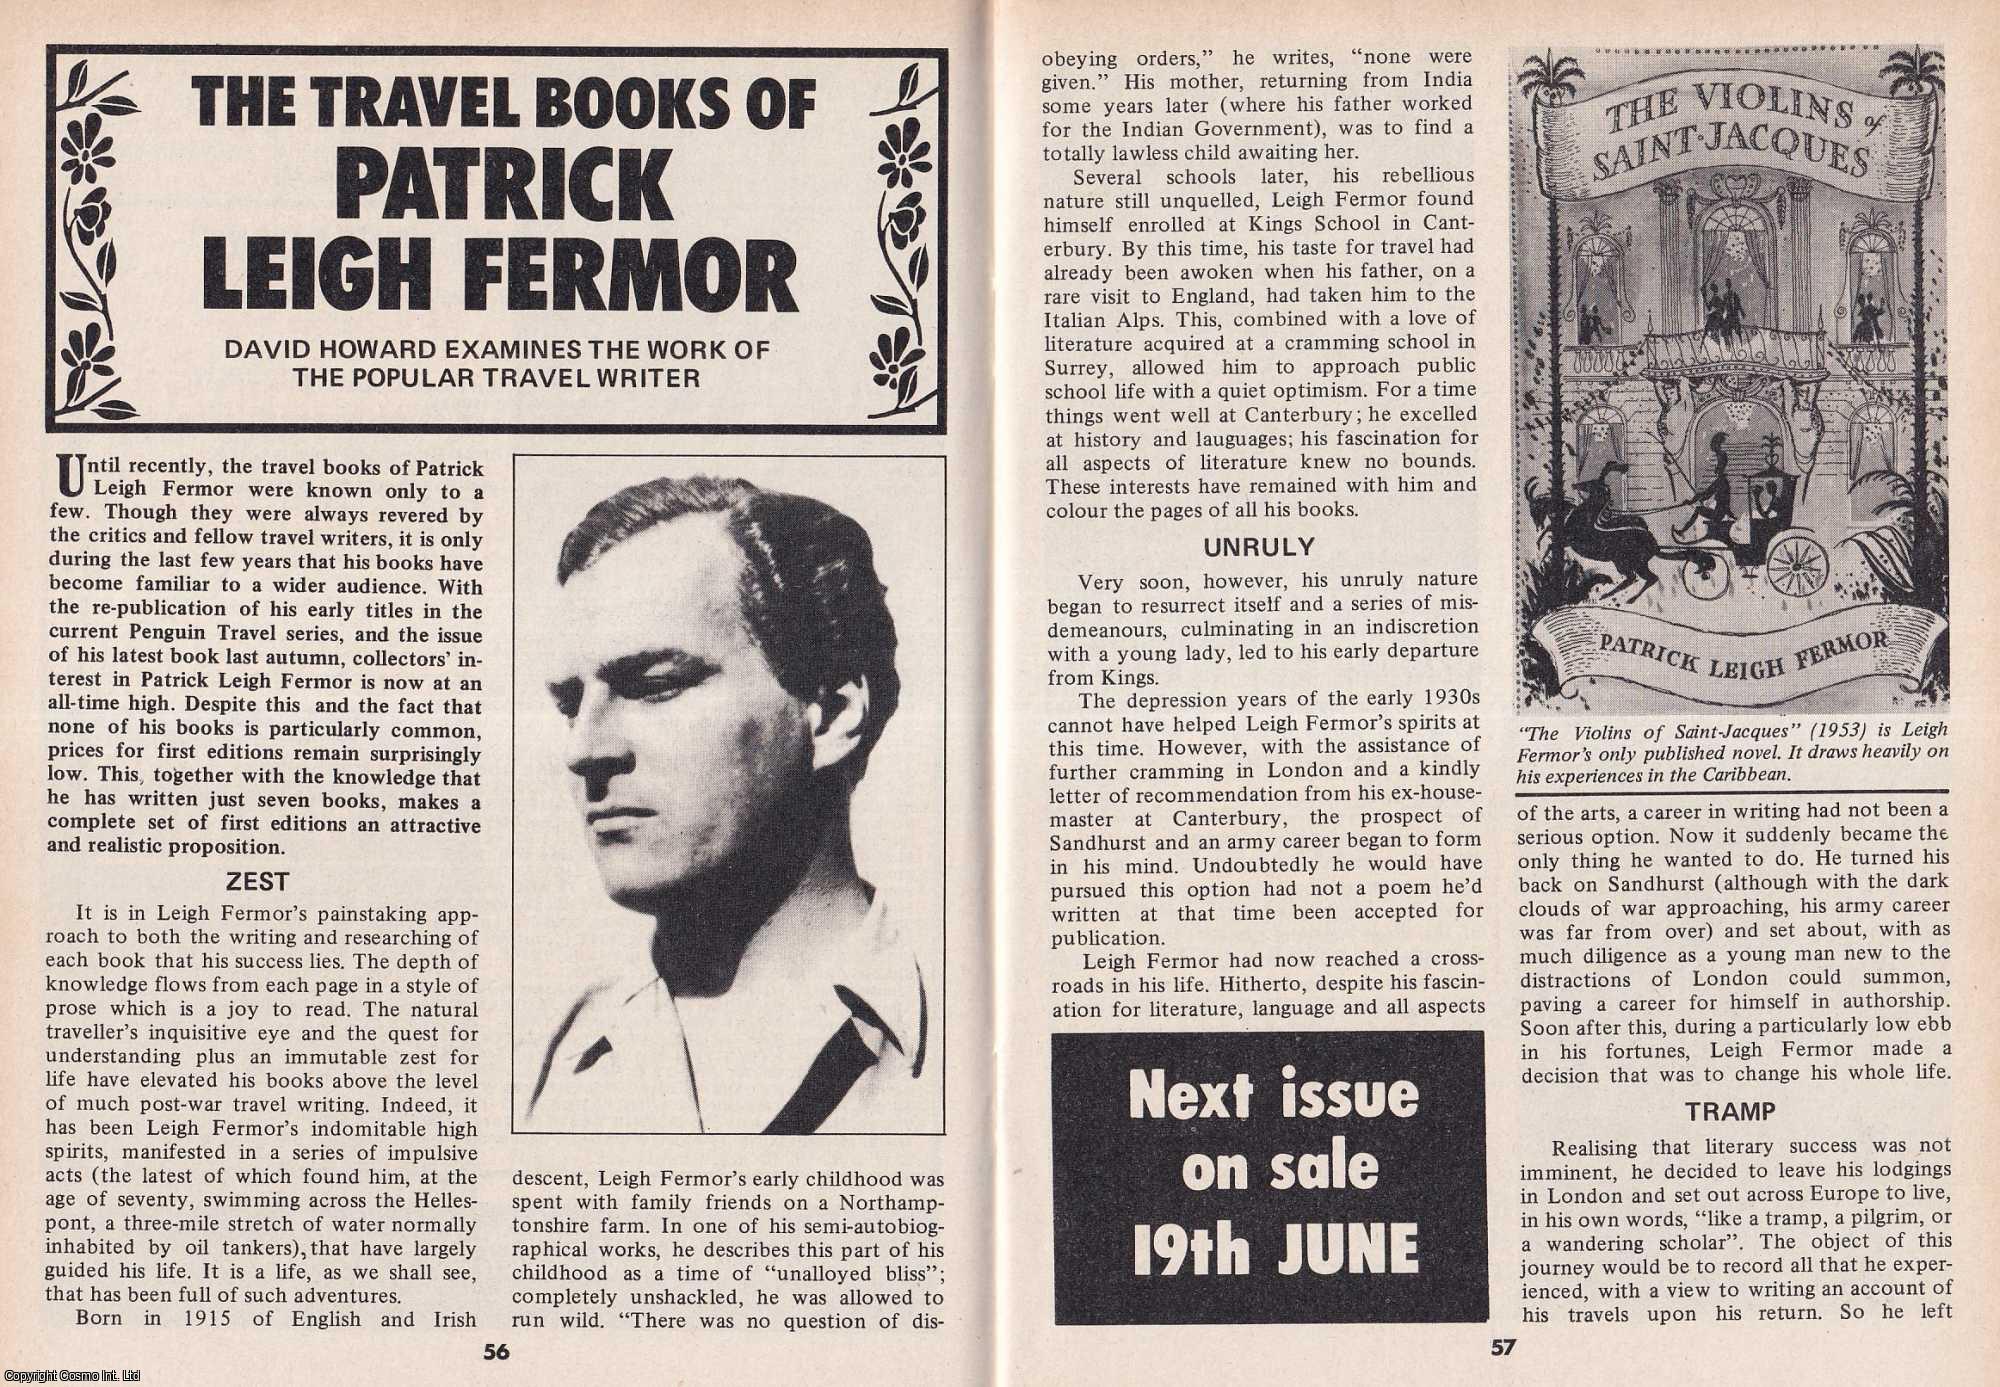 David Howard - The Travel Books of Patrick Leigh Fermor. This is an original article separated from an issue of The Book & Magazine Collector publication, 1987.